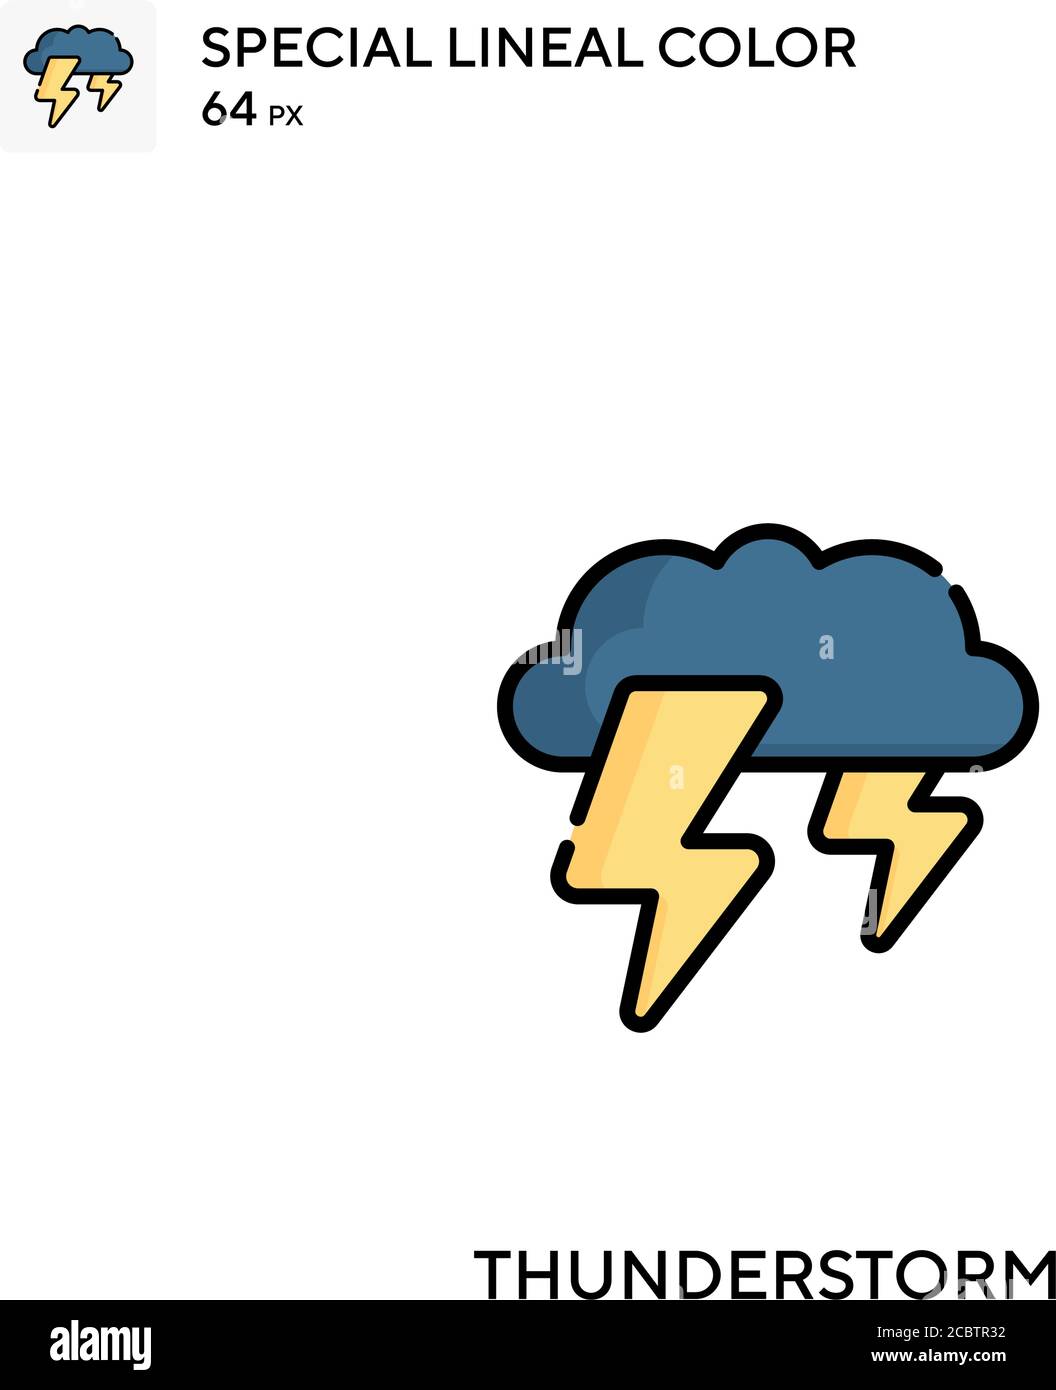 Thunderstorm Special lineal color vector icon. Thunderstorm icons for your business project Stock Vector